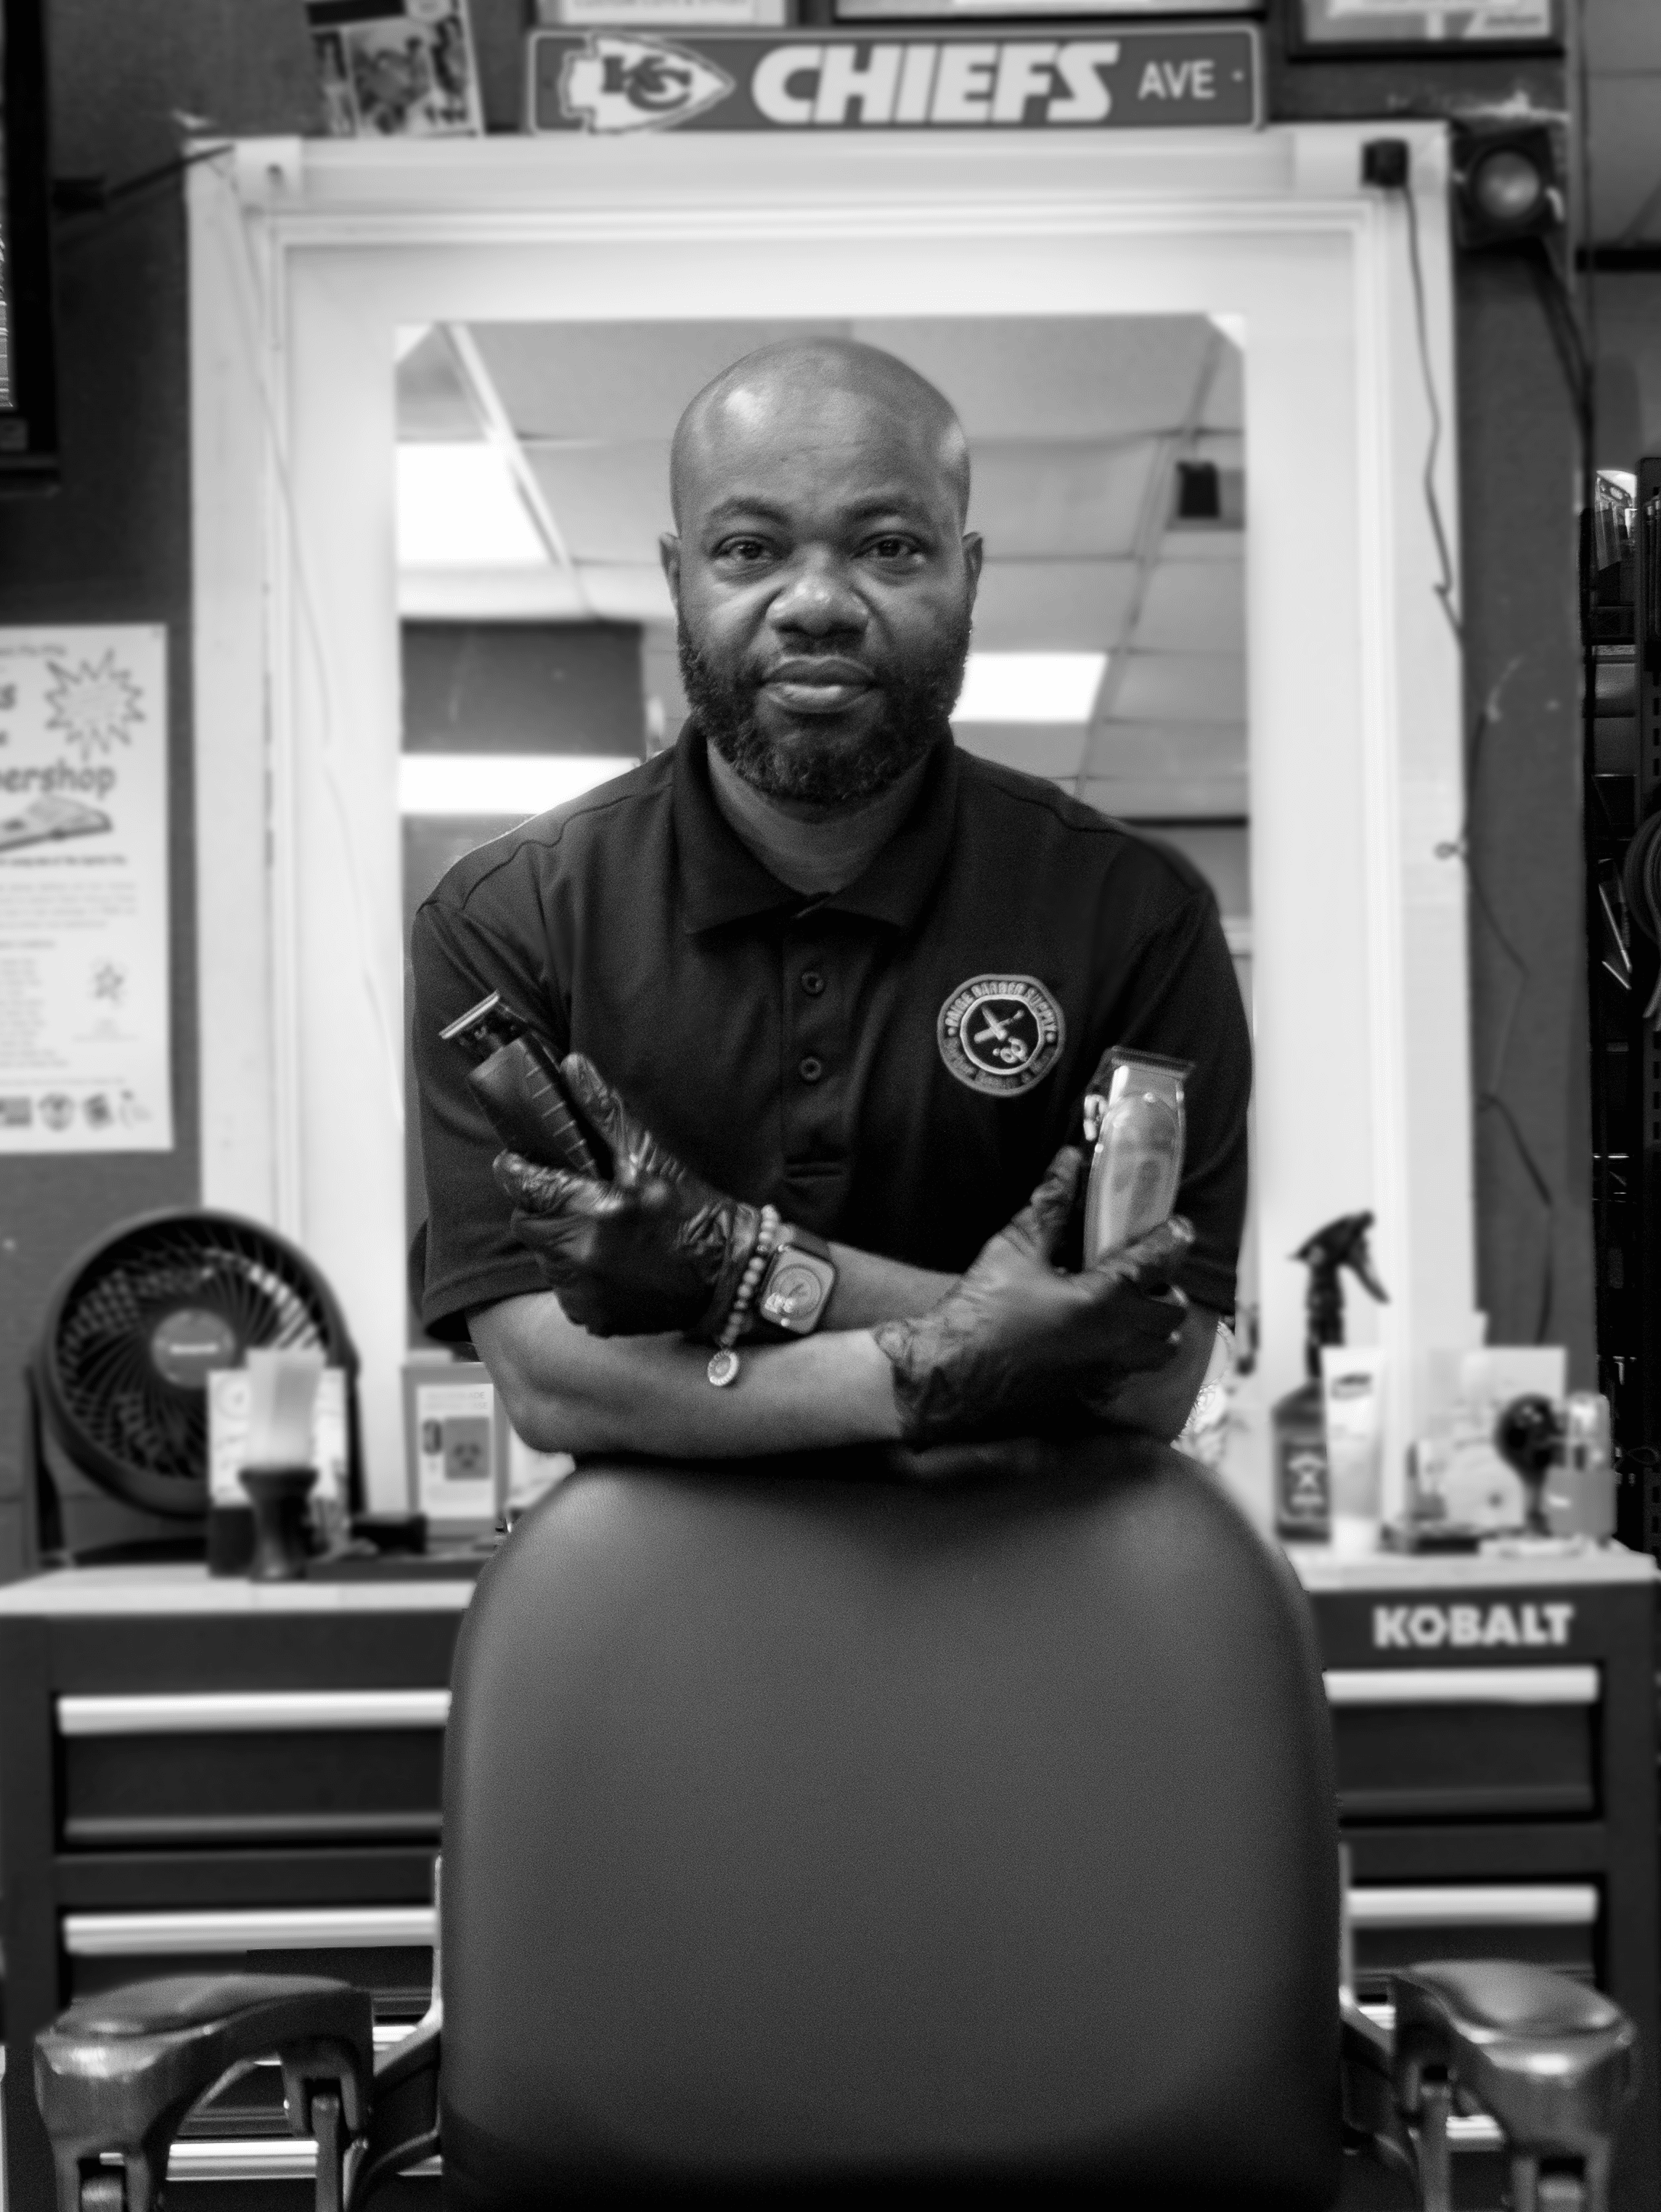 Chris Paige standing behind a barber's chair holding a pair of clippers.